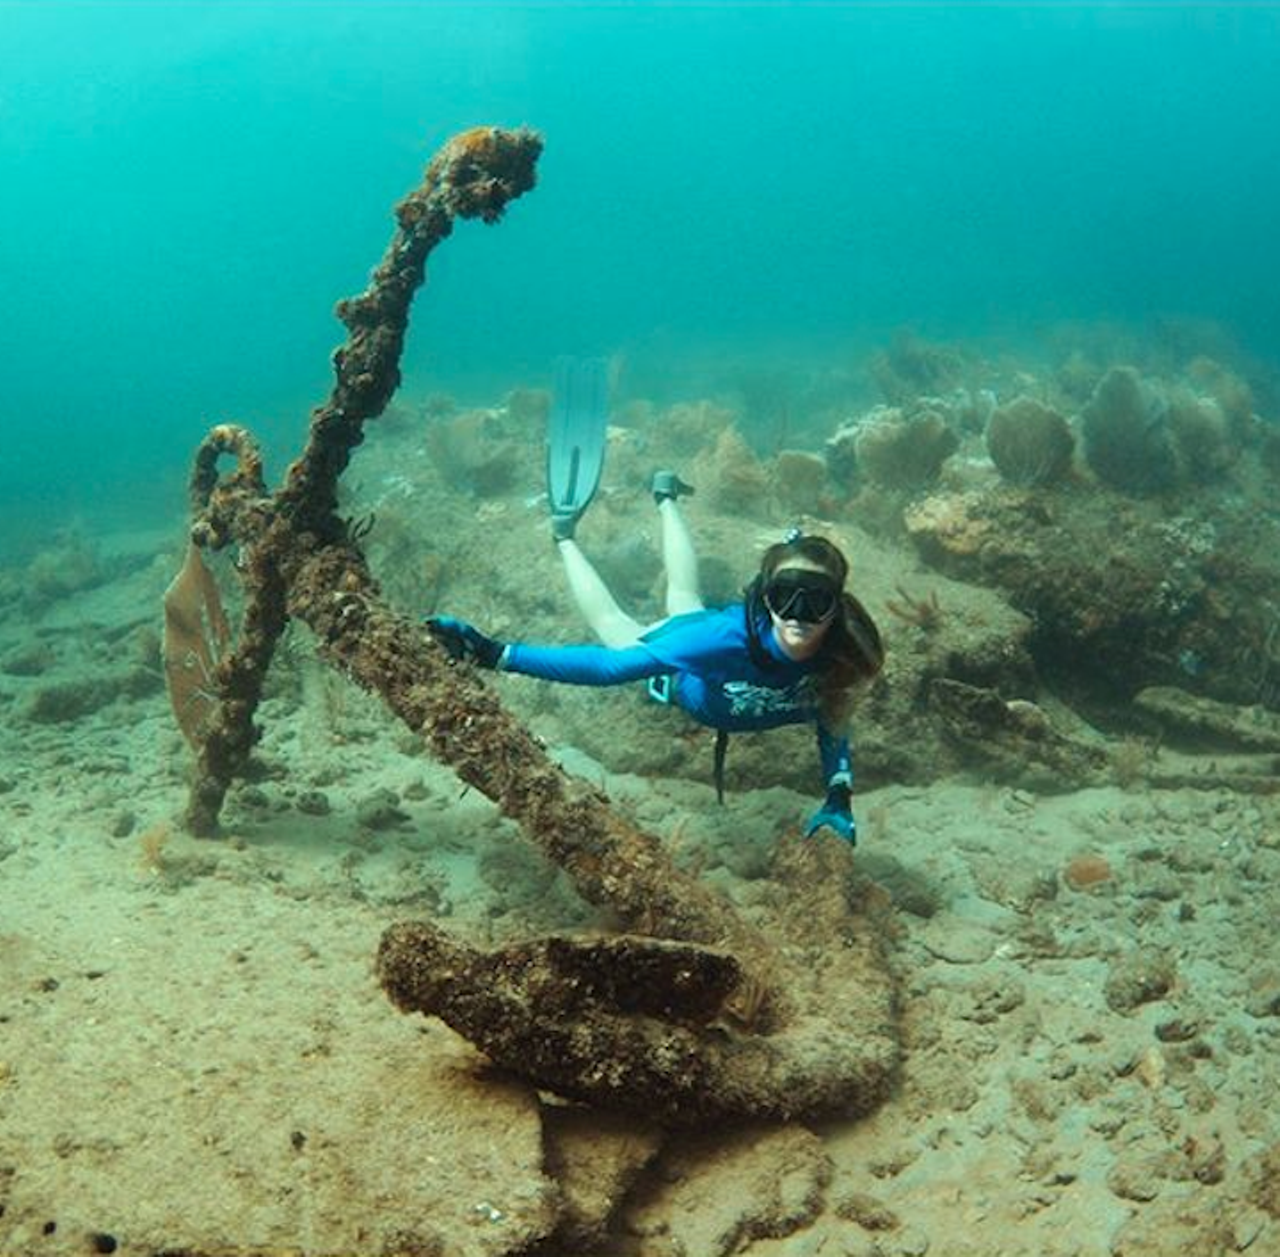 Shipwreck Snorkel Trail
4501 N. Ocean Drive, Lauderdale-By-The-Sea, FL 33308
Drive time: 3 hr 22 min 
This artificial reef was constructed by the Marine Archaeological Council and is an actual underwater trail, featuring an anchor, five concrete cannons and a ballast pile for snorkelers to explore. The Shipwreck Snorkel Trail, which is located off Datura Street, took four years to complete. Snorkelers are welcome to venture among the shipwreck artifacts that are scattered within a 100- by 20-foot area.
Photo via szjanko/Instagram